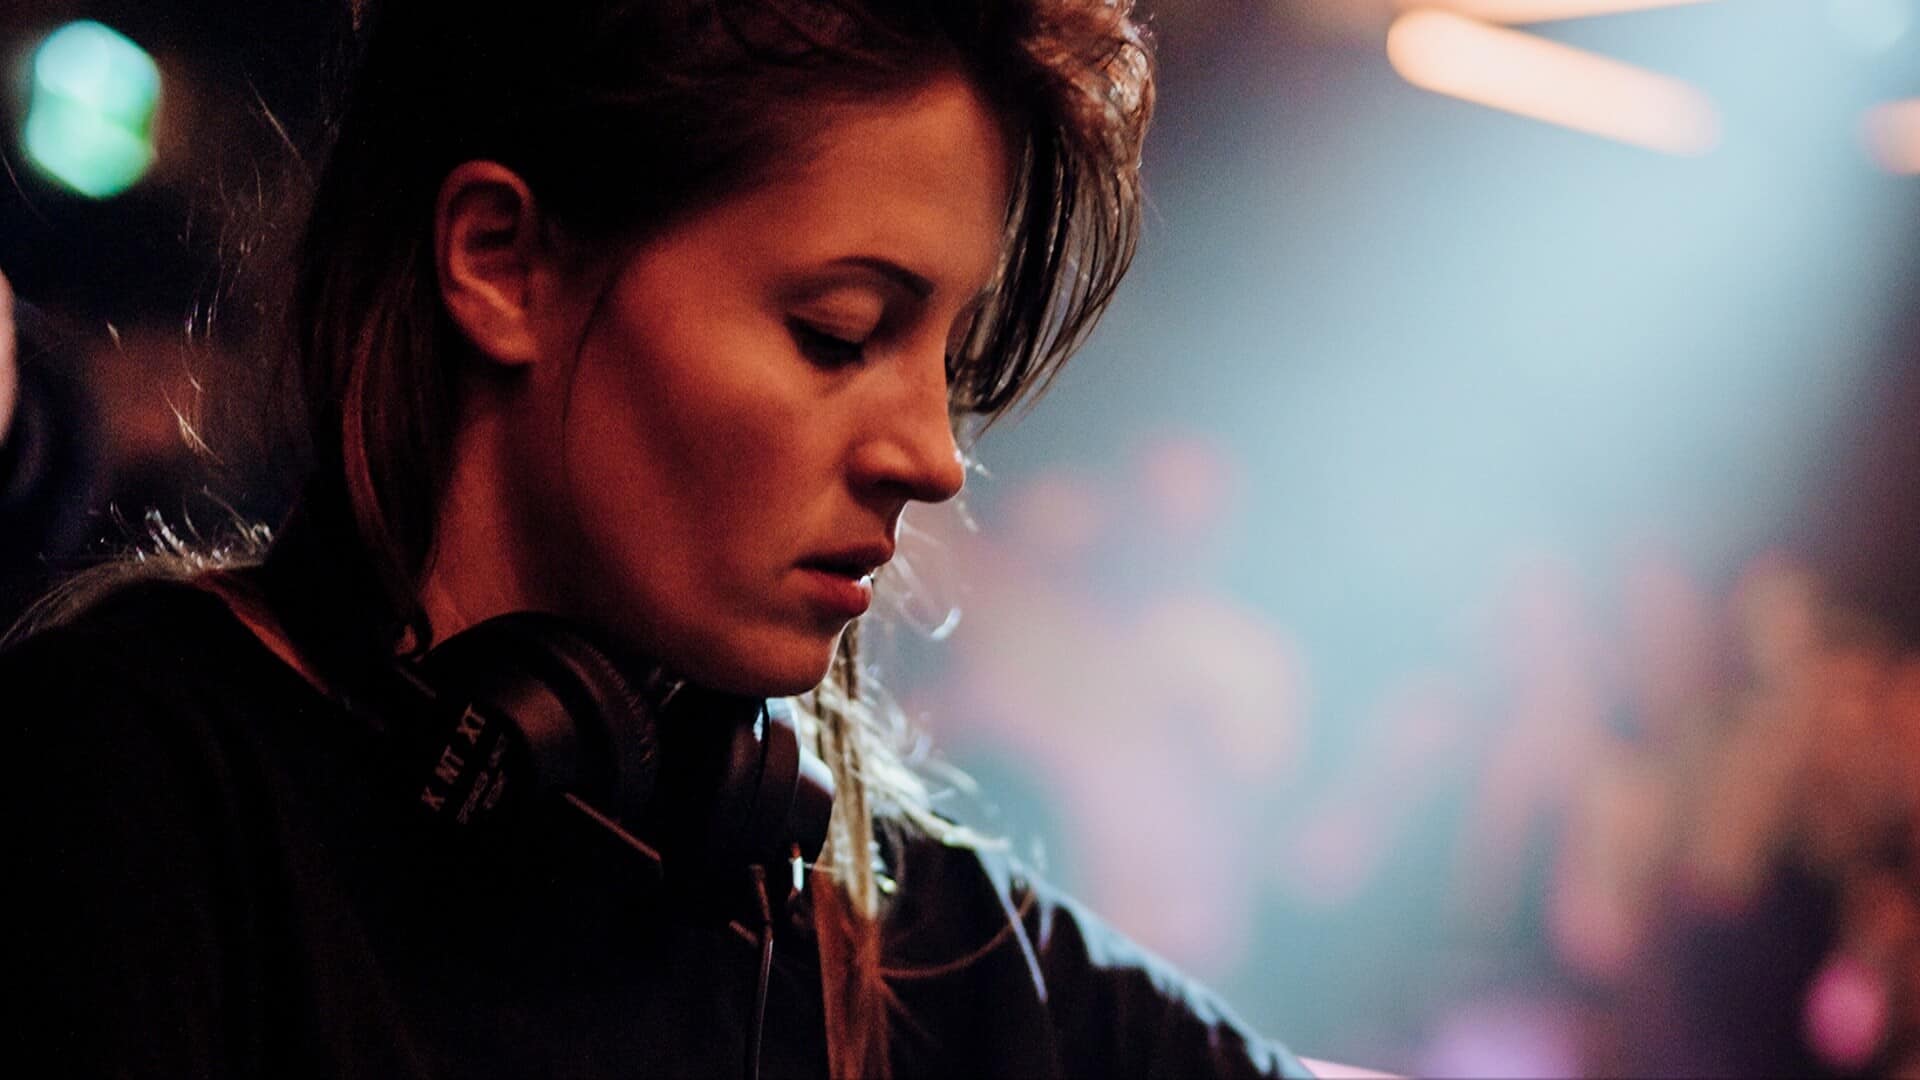 Charlotte de Witte set Ultra Miami Mainstage on fire with the finest techno: Watch